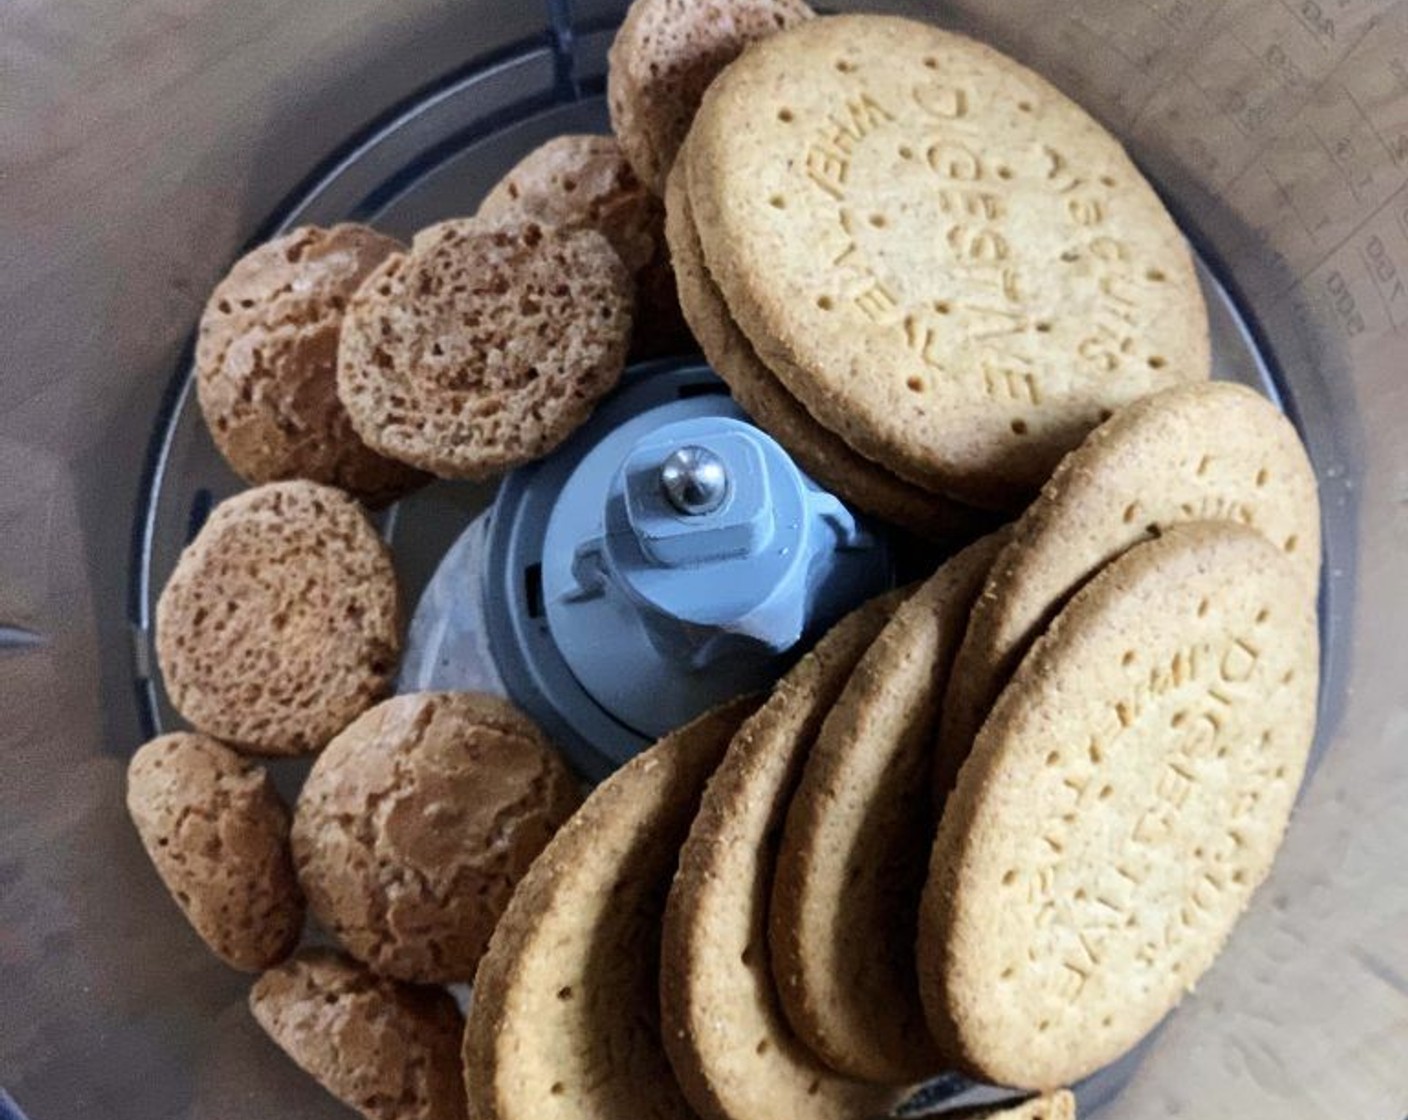 step 1 Start off by placing the Digestive Biscuit (1 cup) and Amaretti Biscuits (1/3 cup) into a food processor and pulse them until powdered.